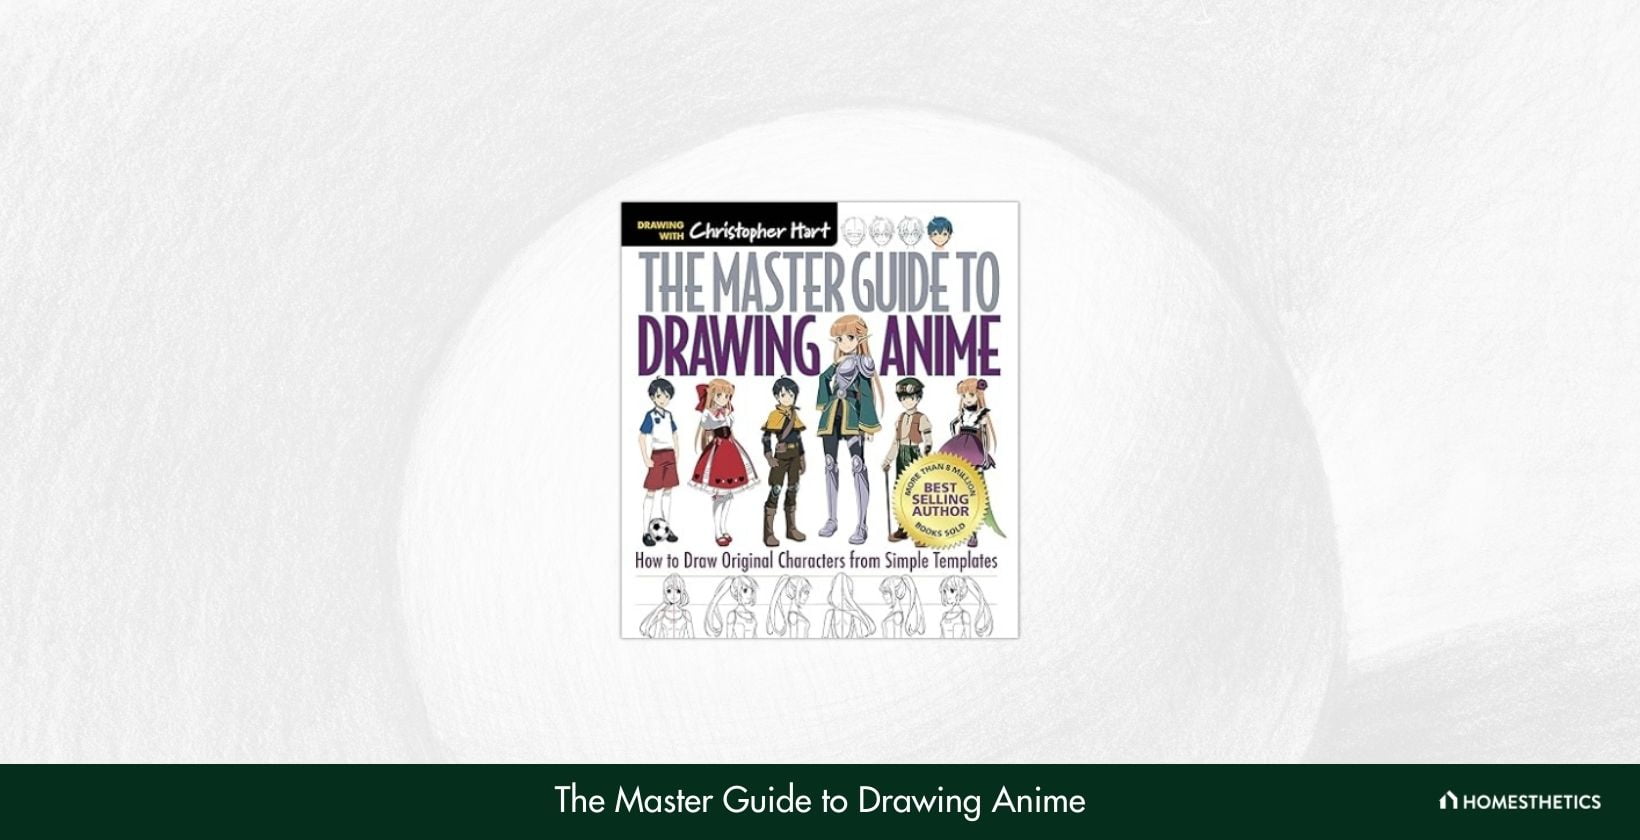 The Master Guide to Drawing Anime How to Draw Original Characters from Simple Templates by Christopher Hart